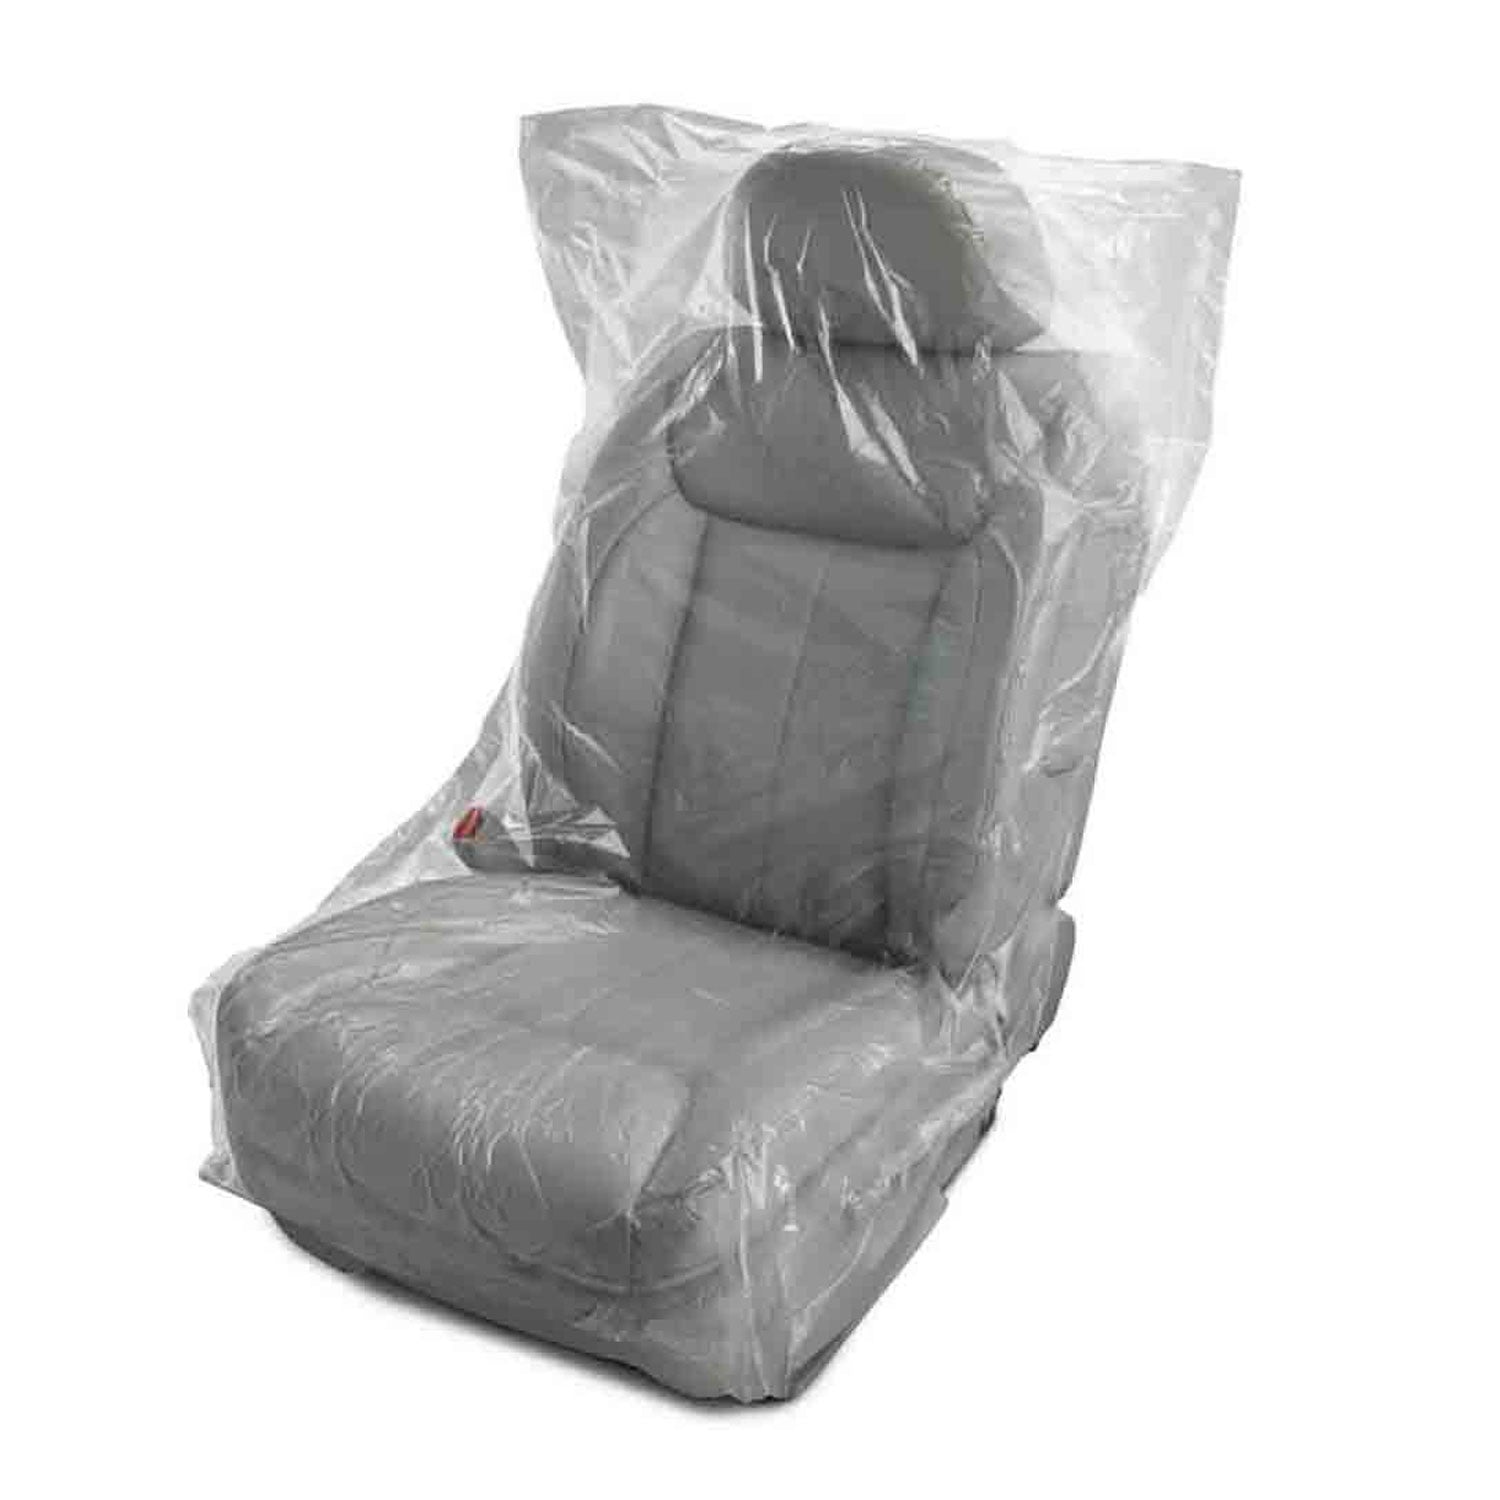 plastic-seat-cover-over-a-seat